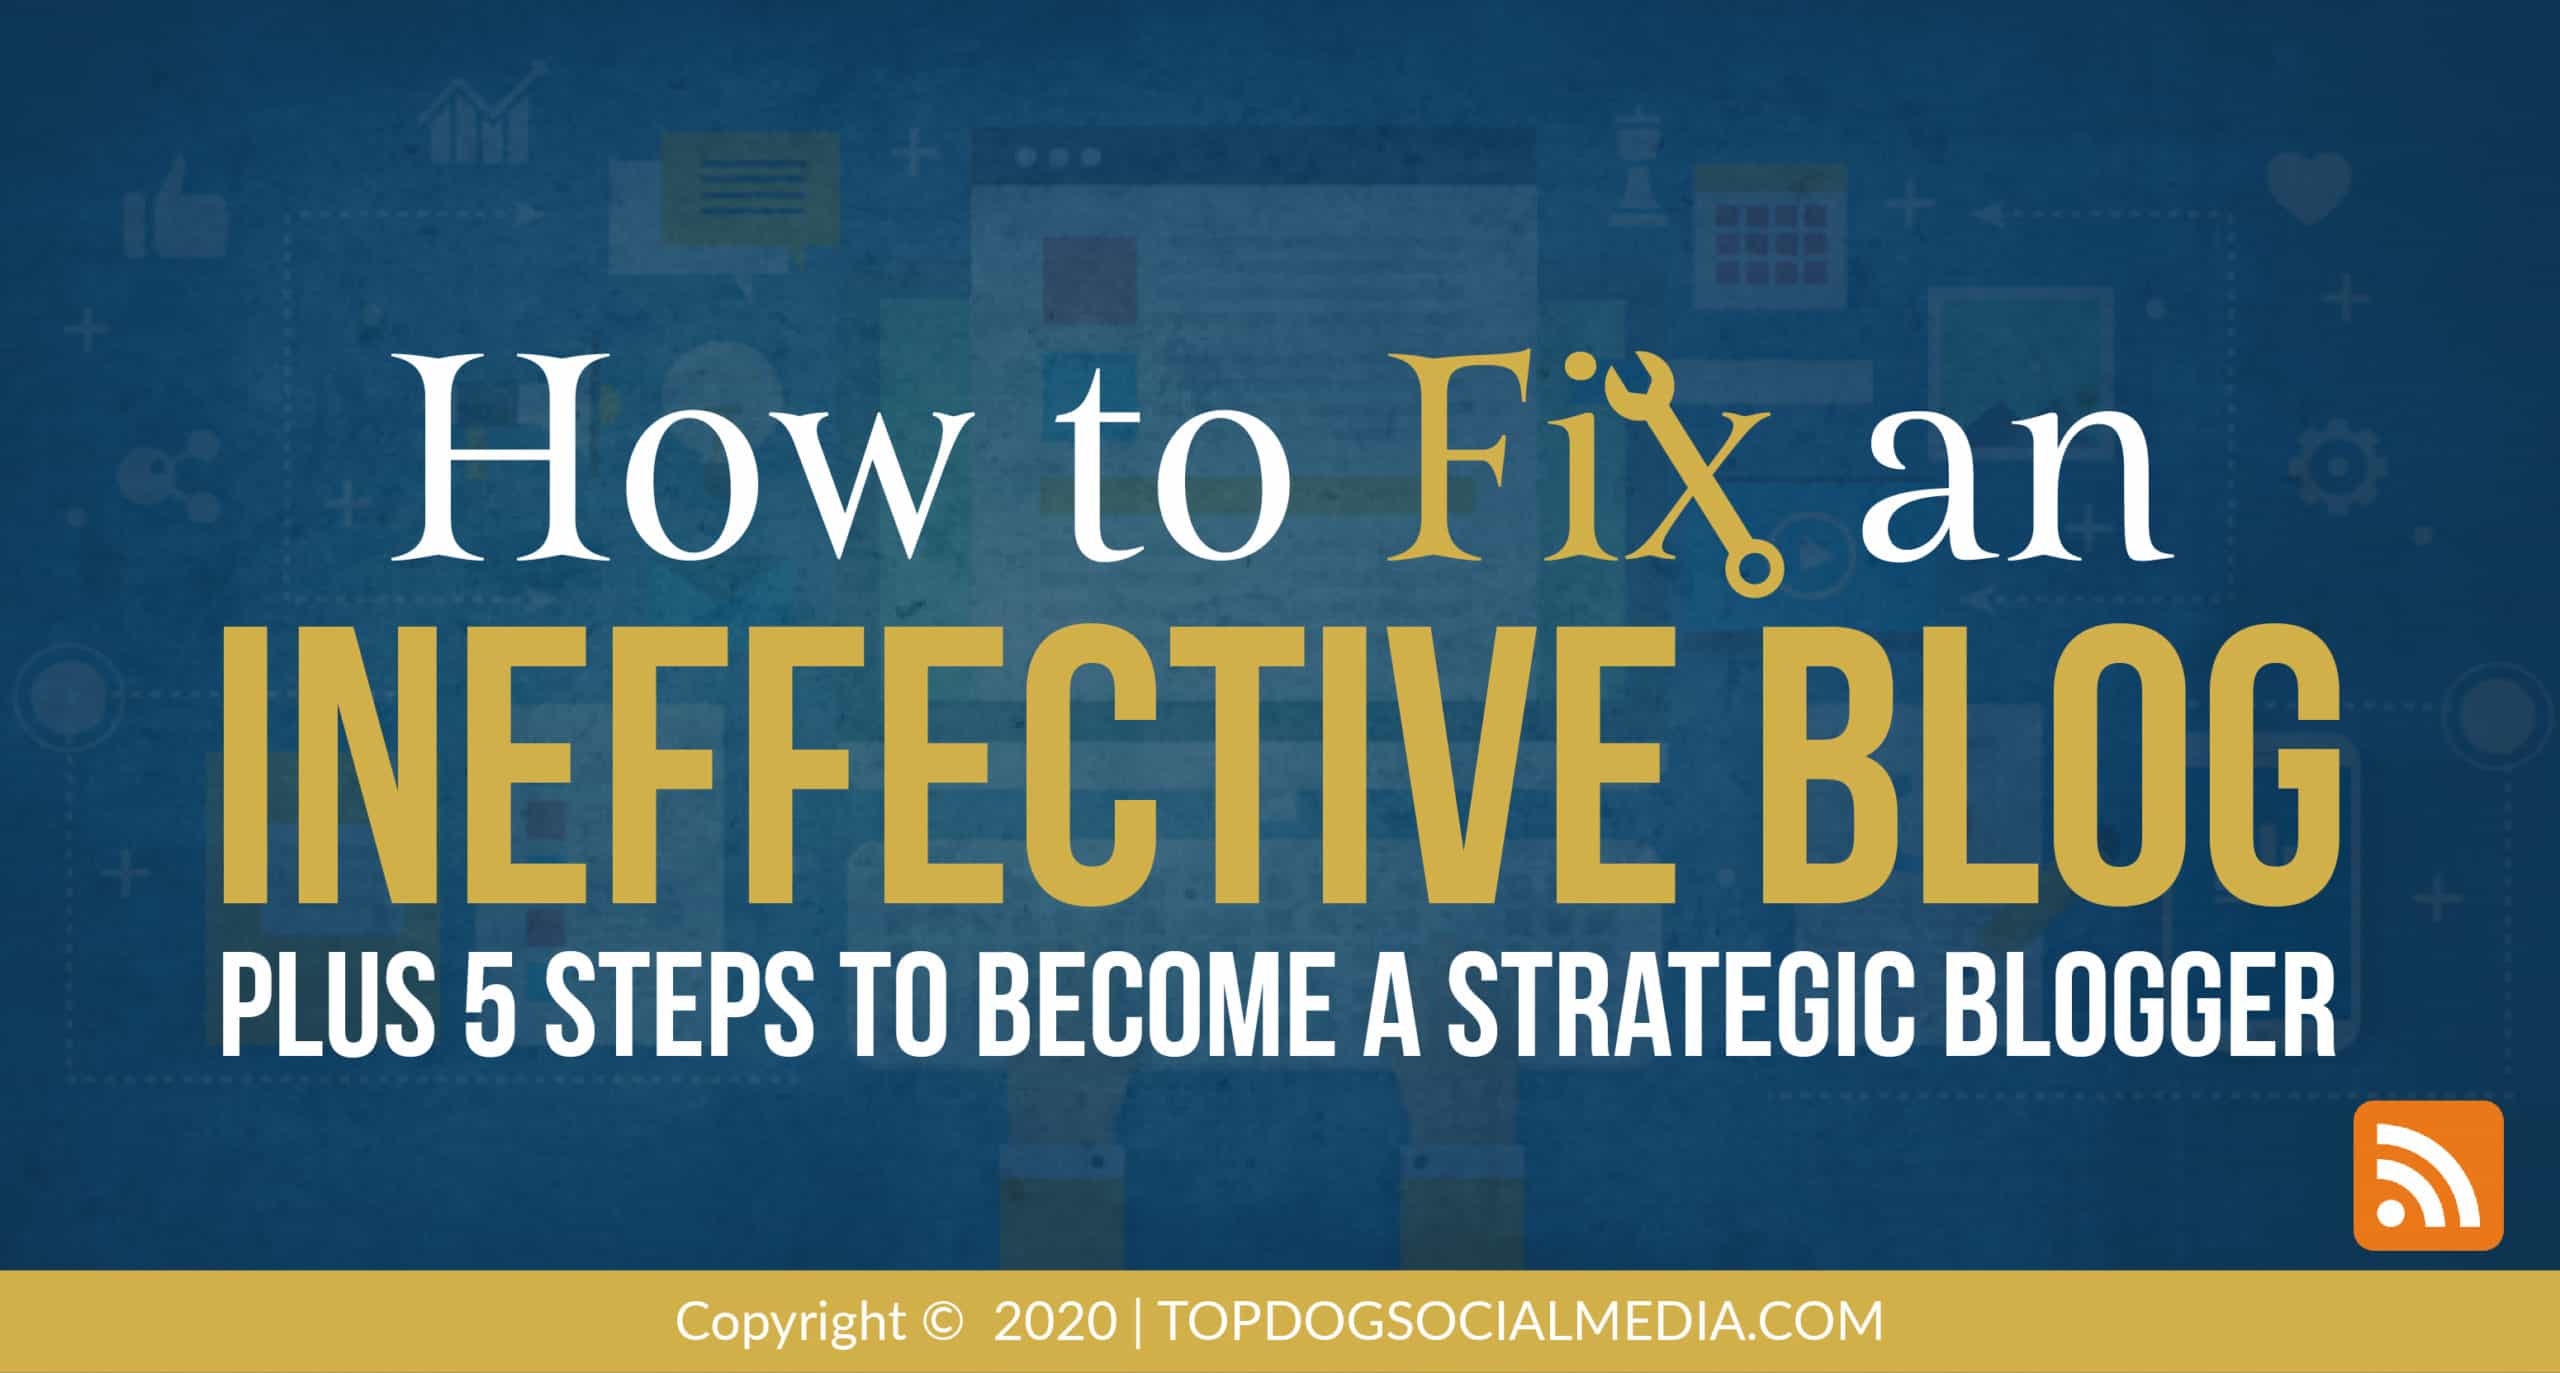 How to Fix an Ineffective Blog (Plus 5 Steps to Becoming a Strategic Blogger)